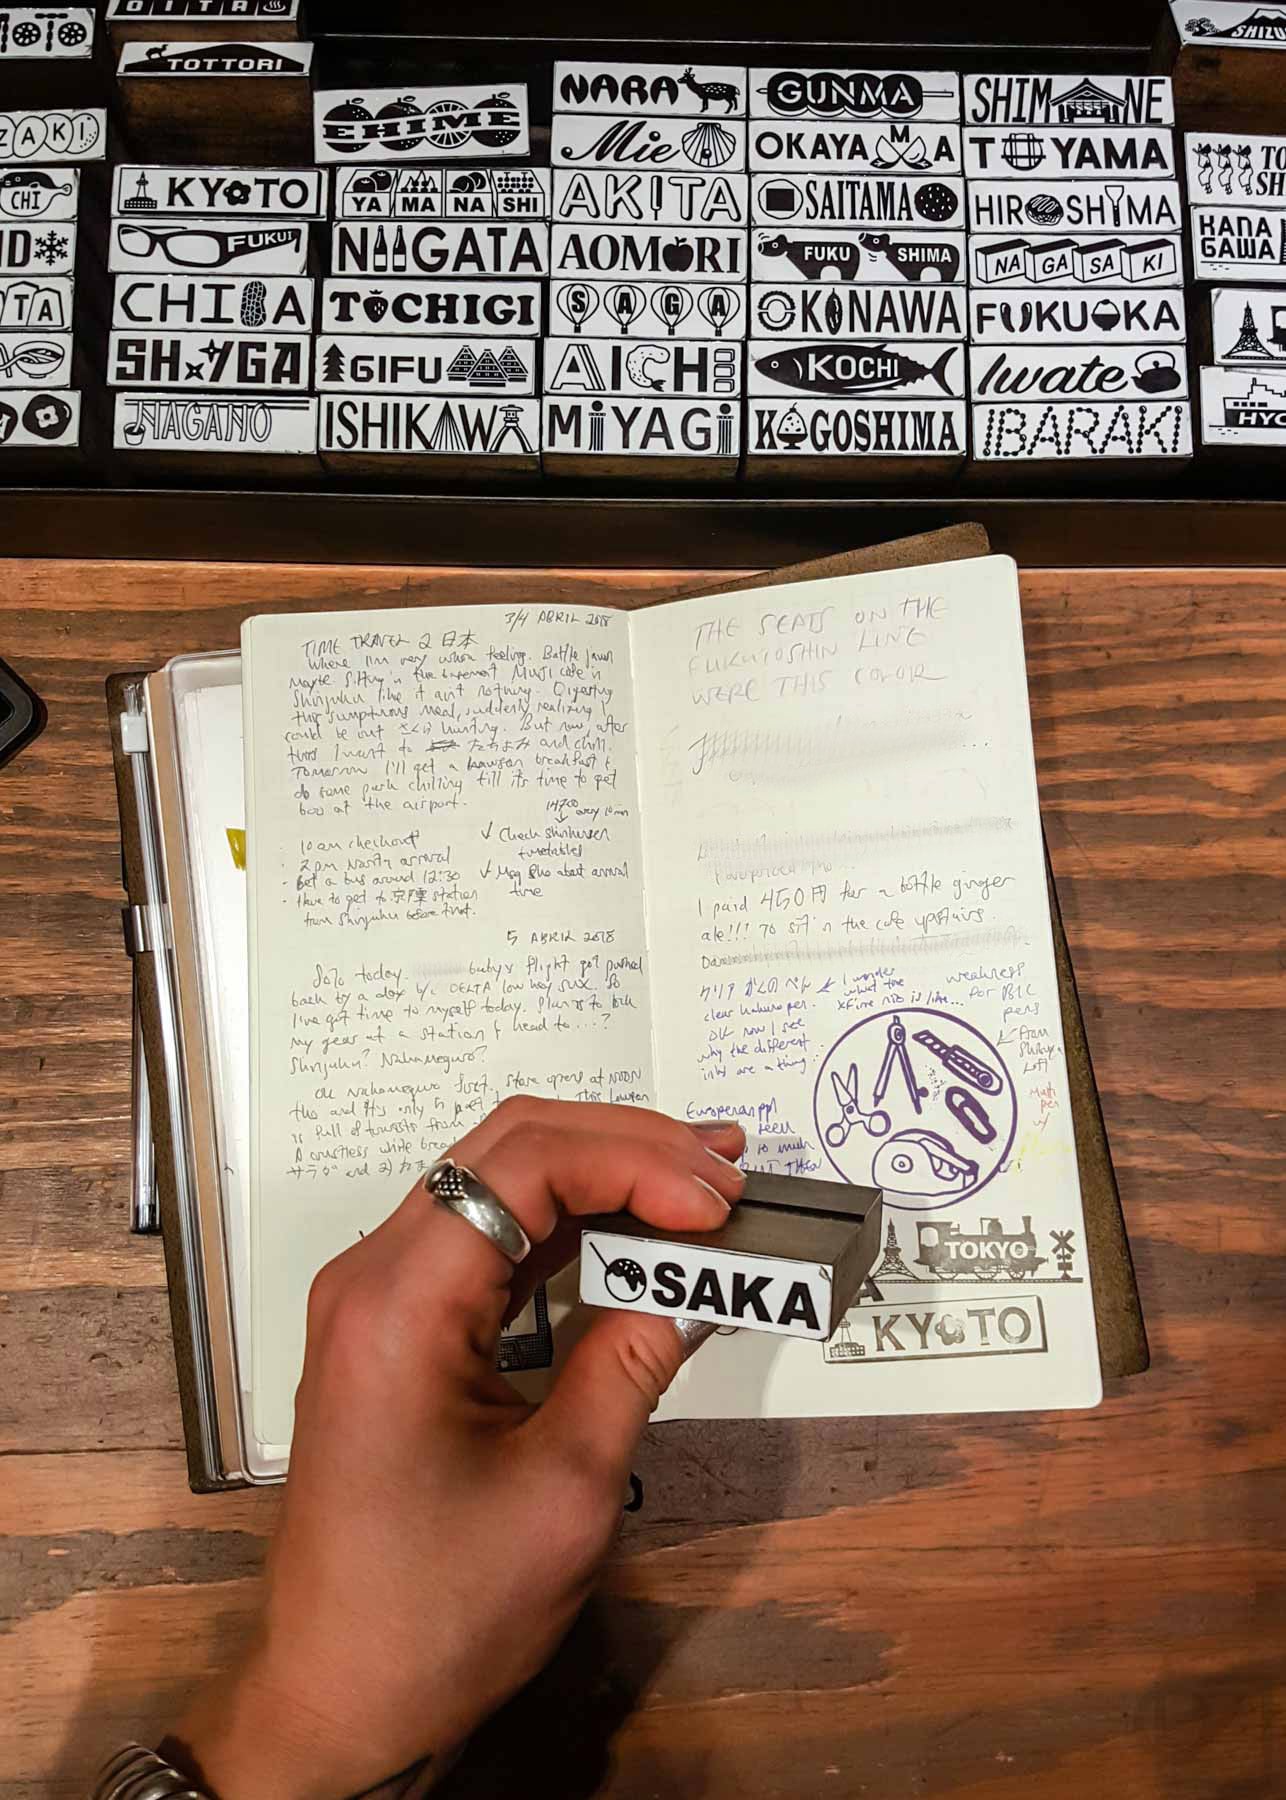 I stamped Tokyo, Kyoto, and Osaka in my journal at the Tokyo Station TRF, since I was visiting those three cities on my trip